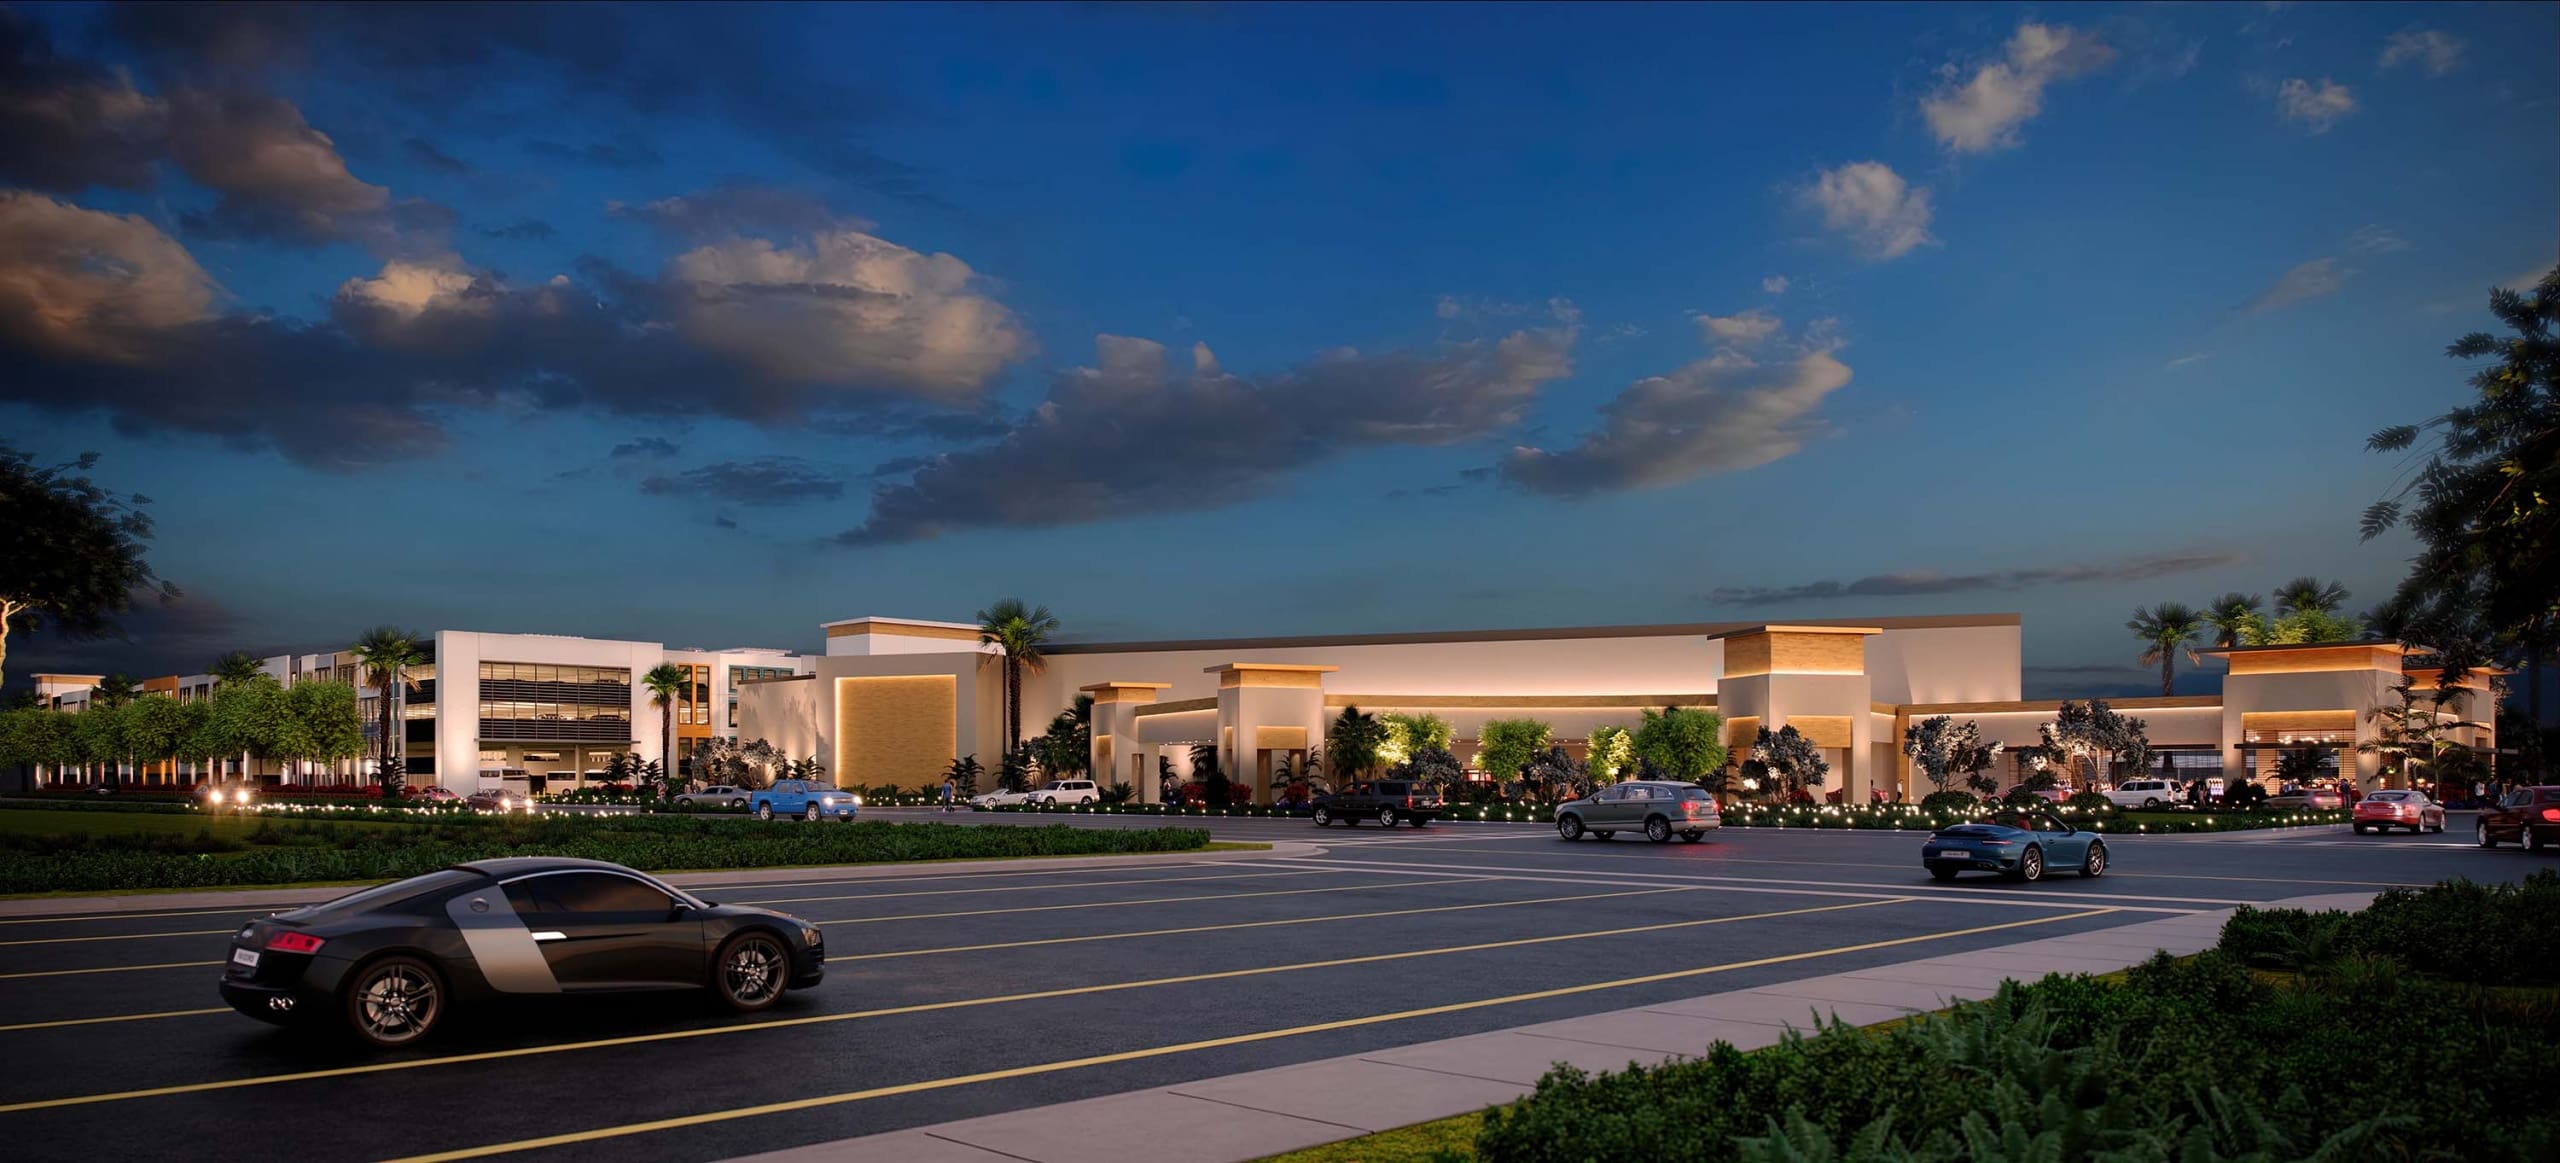 Rendering of Harrah's Pompano Beach showing the casino with the new parking garage (on left) and the new gaming terrace (on right).